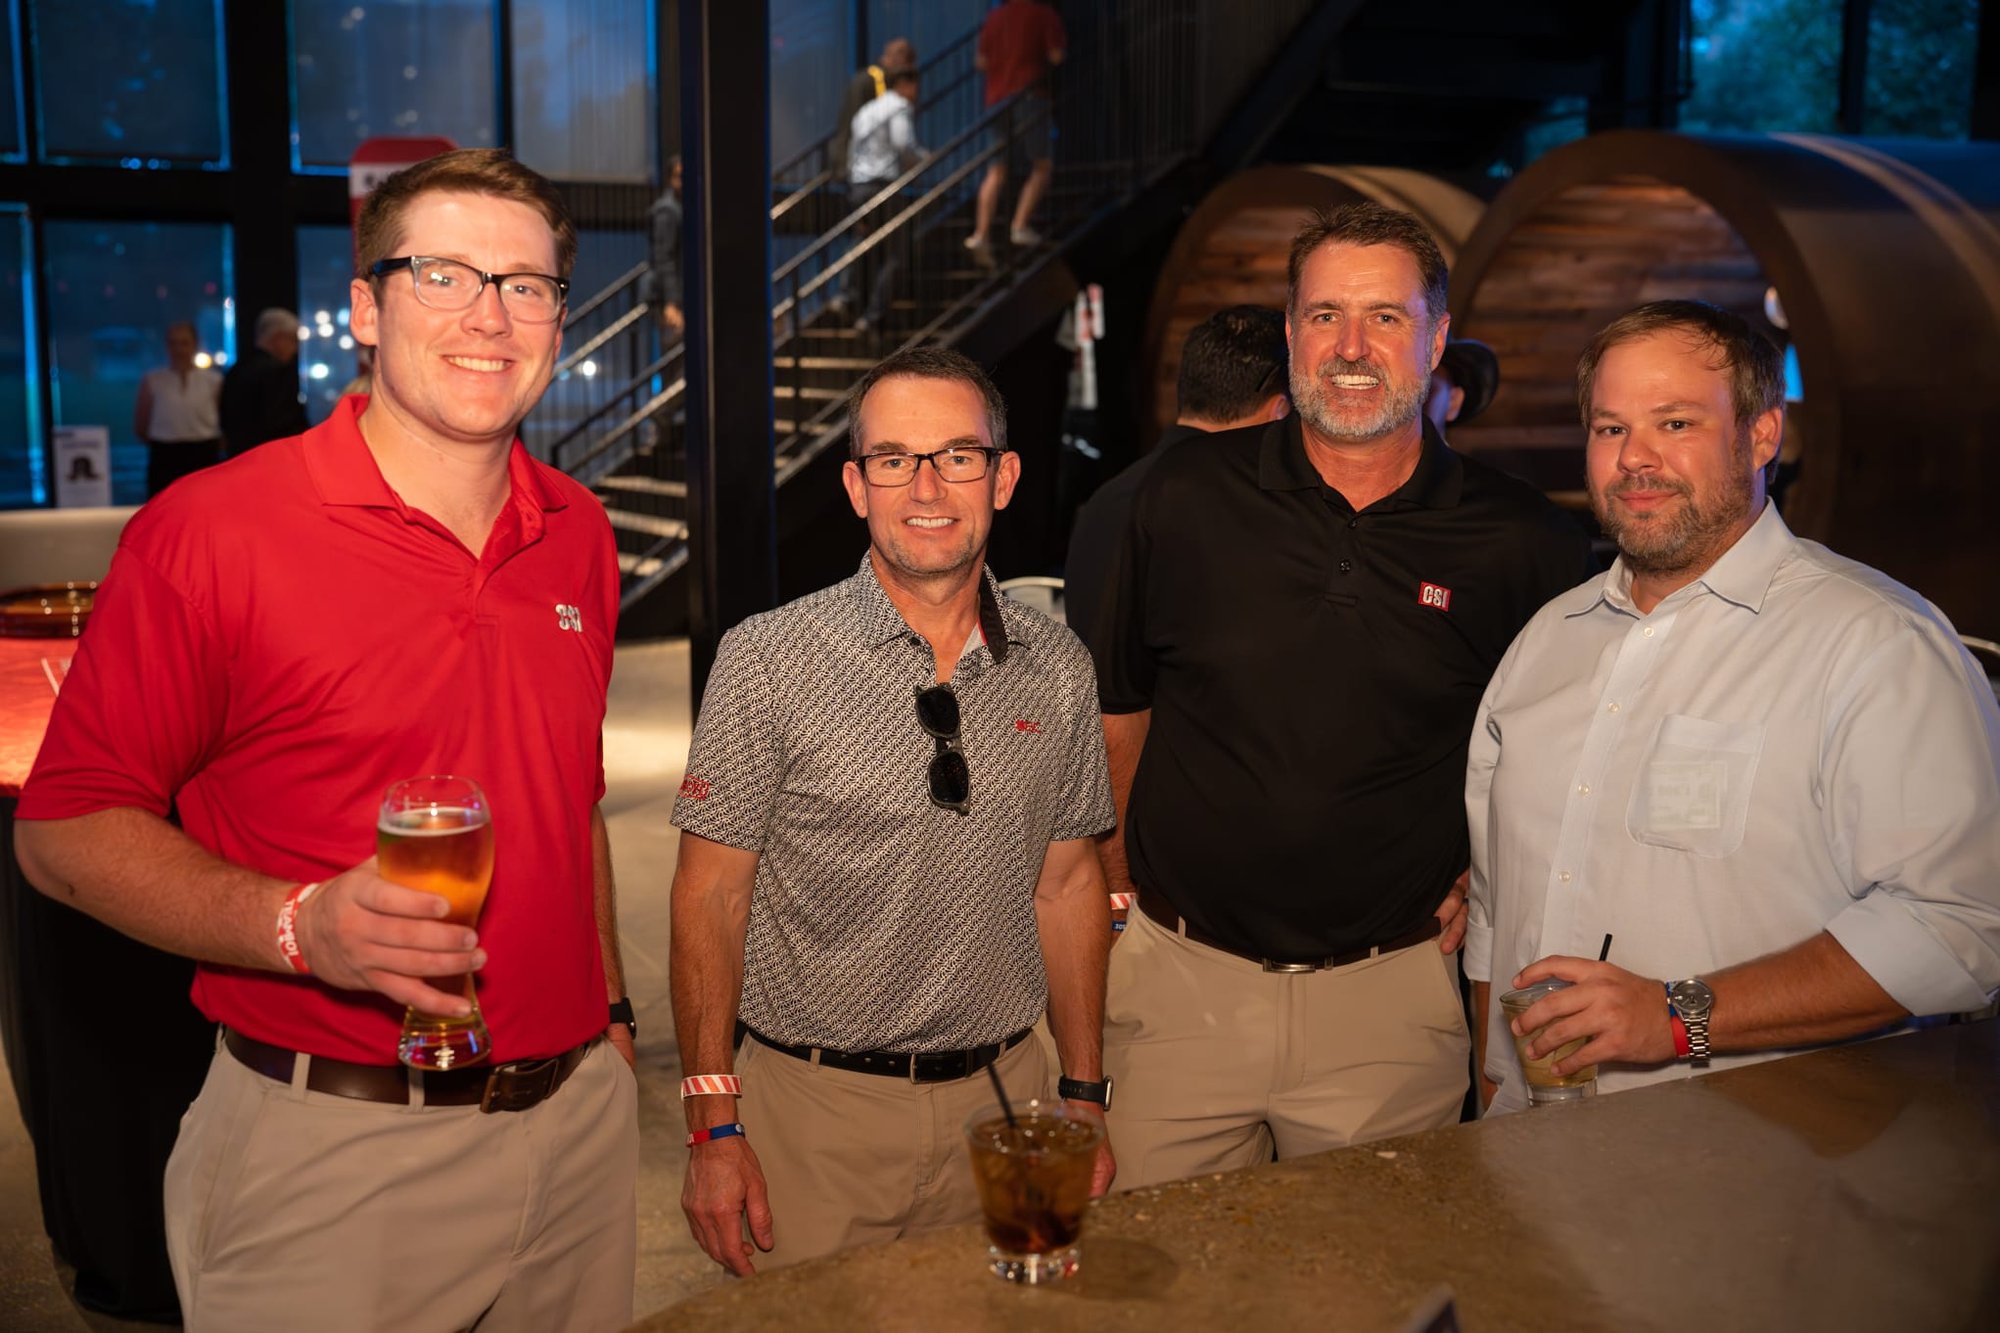 Candid shot of attendees of Security 101 Appreciation Event at Happiest Hour in Dallas, TX